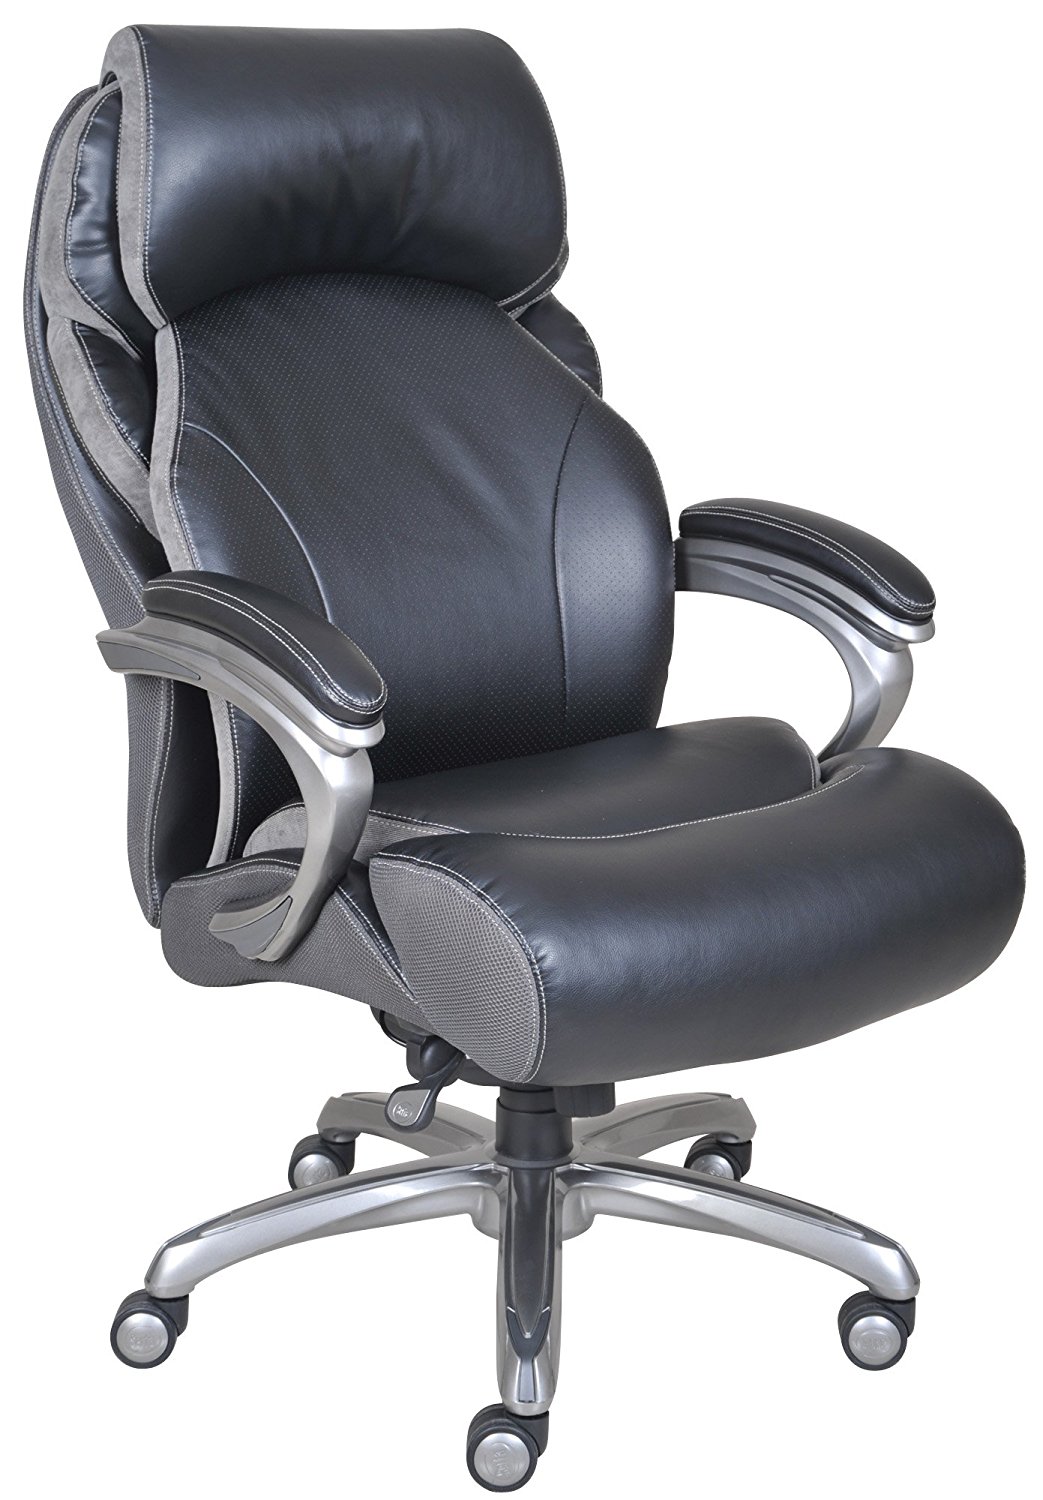 most comfortable office chair under $500